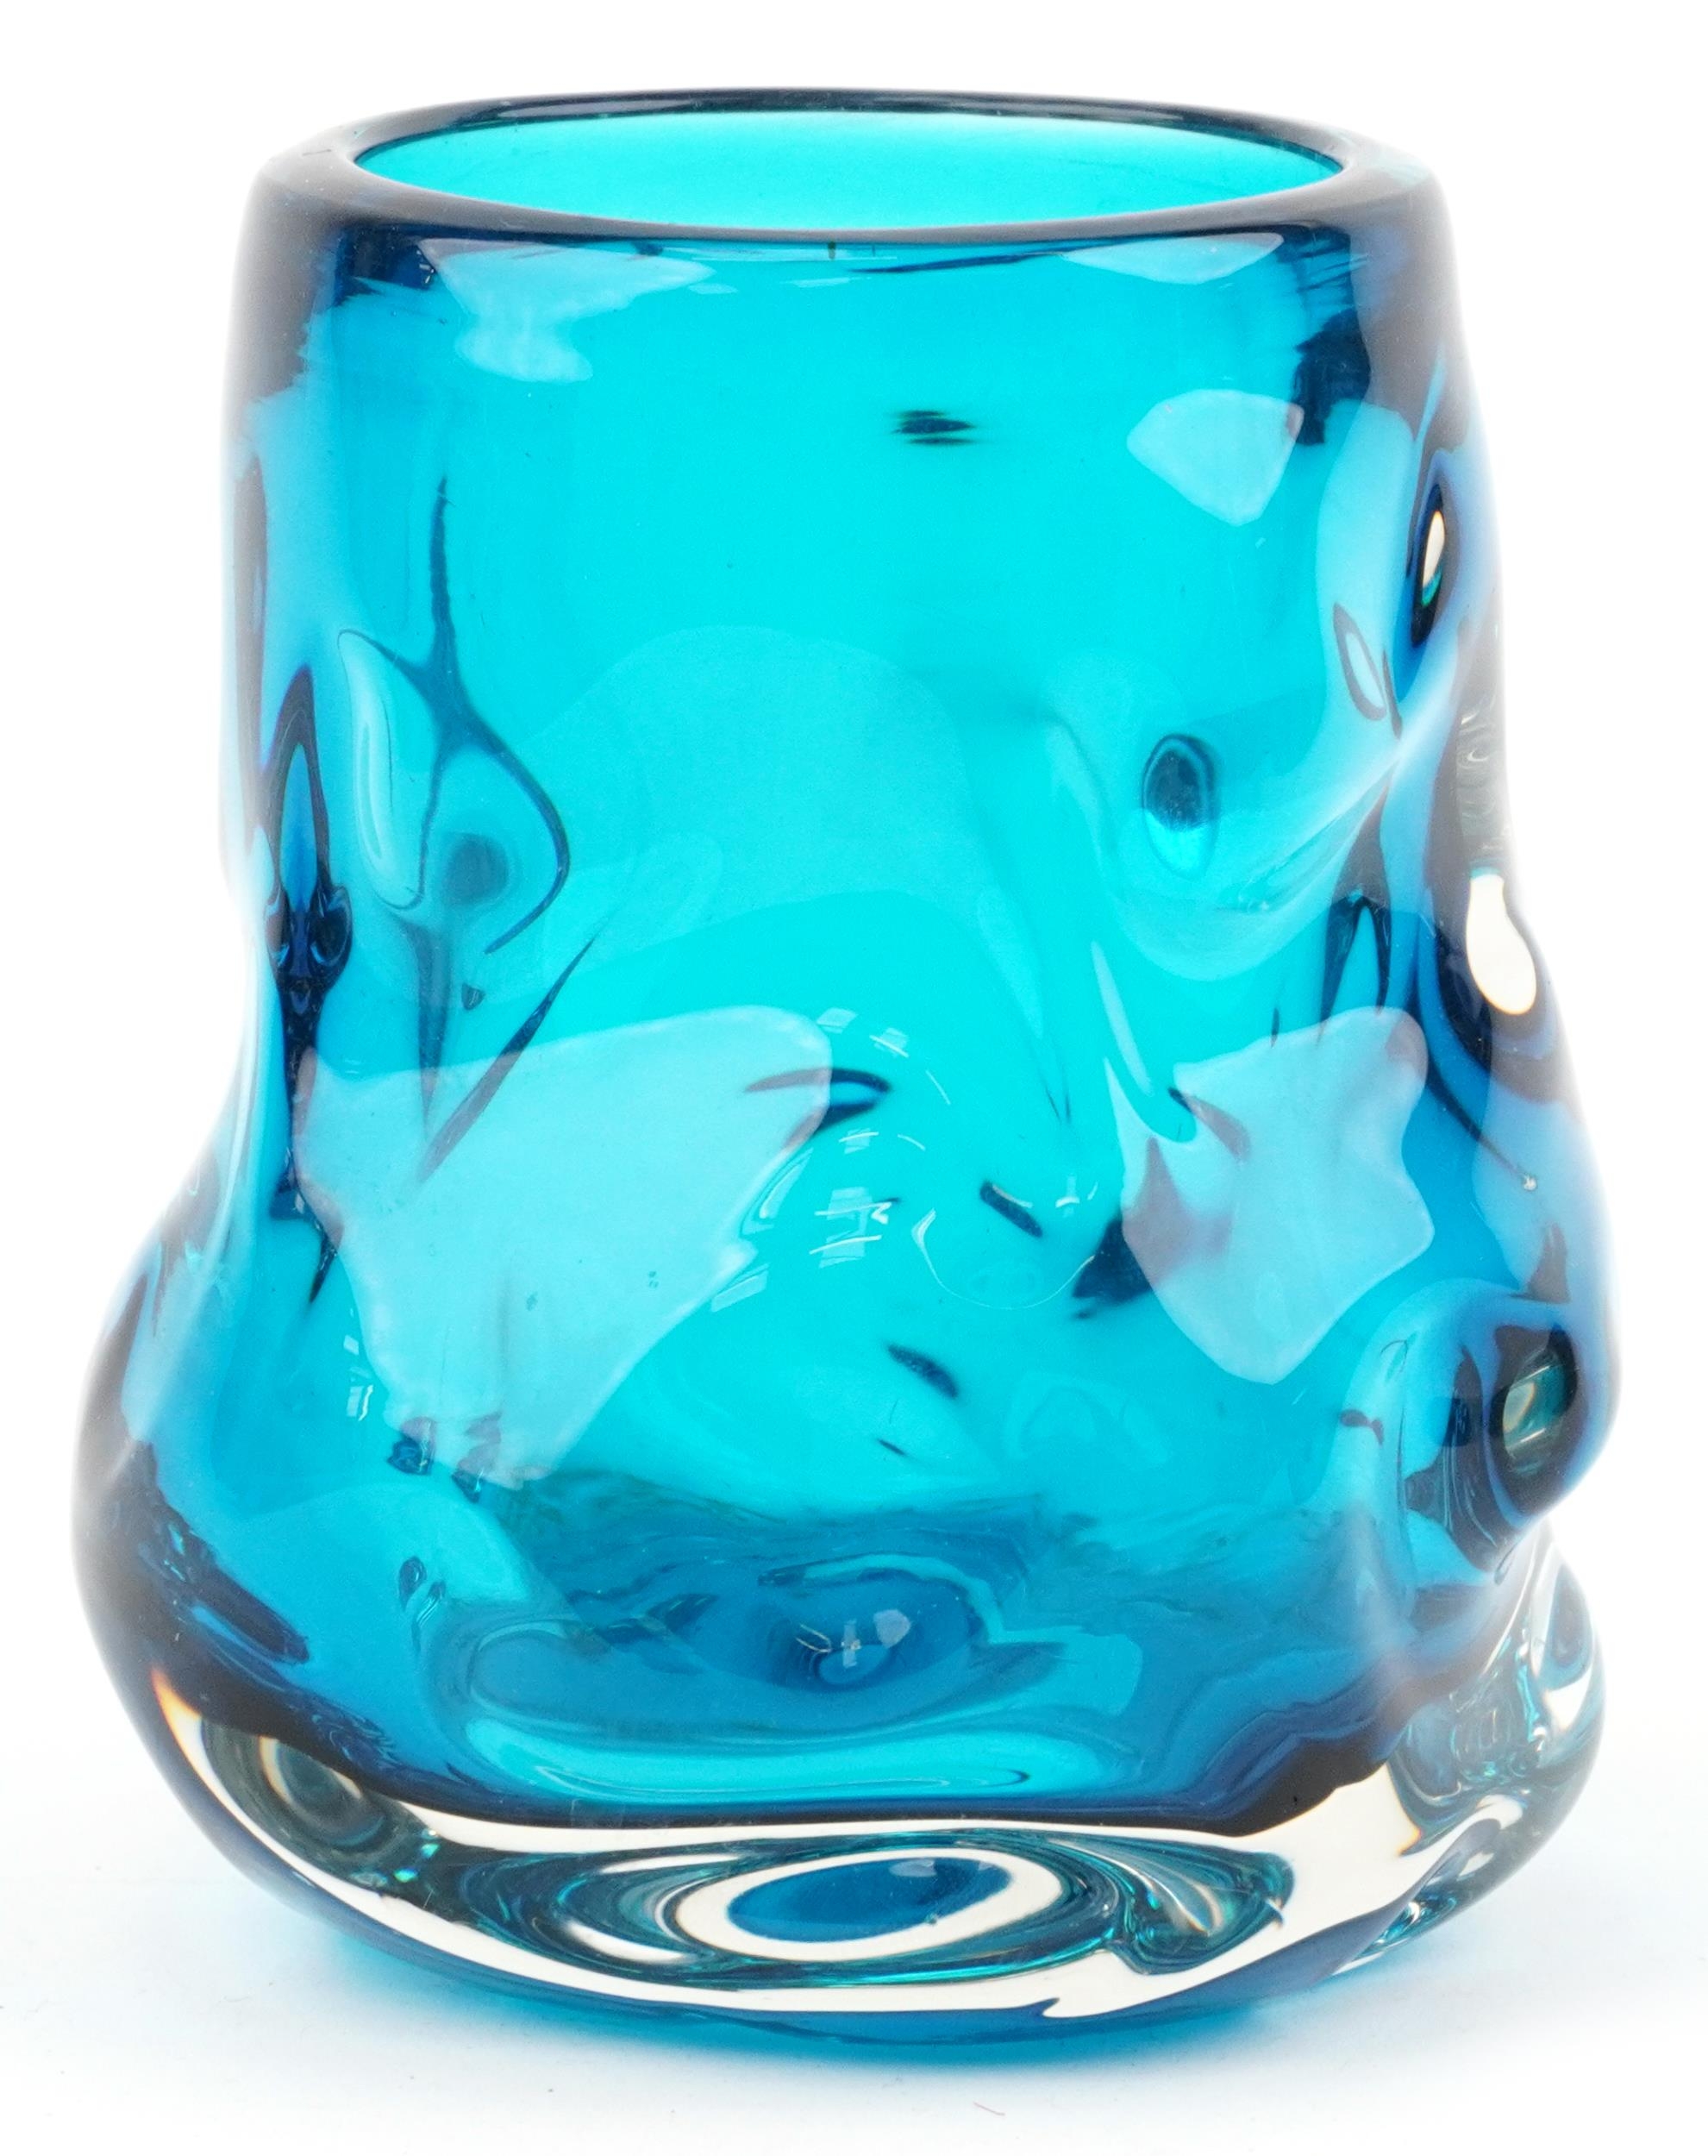 Geoffrey Baxter for Whitefriars, knobbly glass vase in kingfisher blue, 22.5cm high